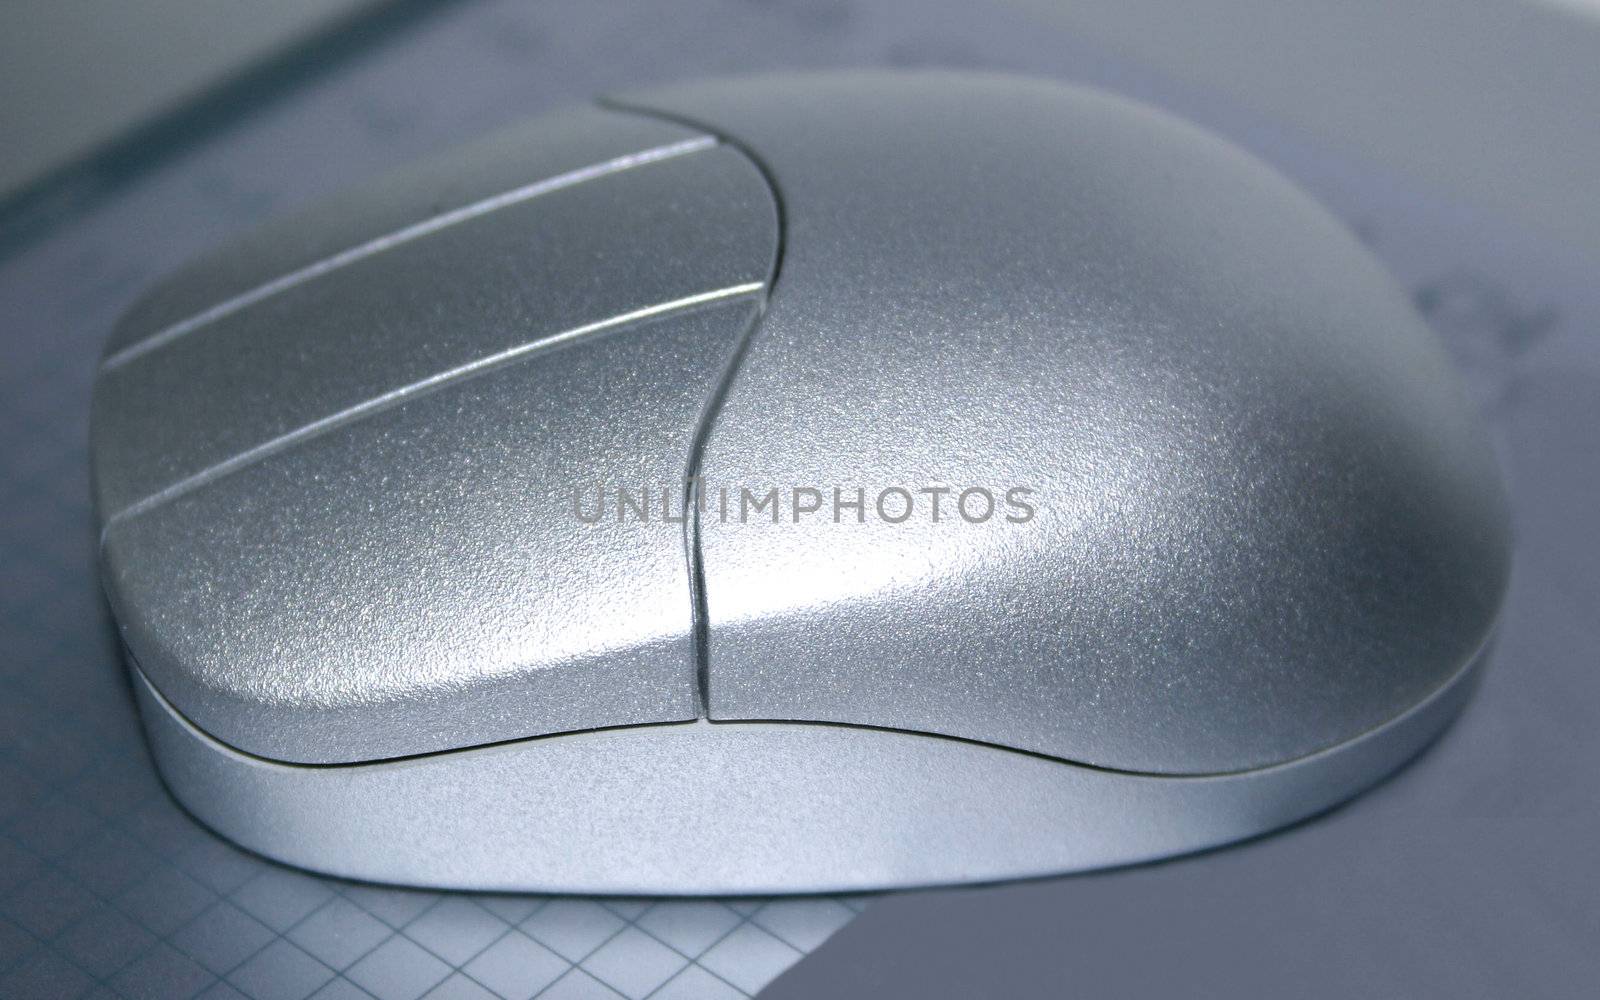 wireless mouse by leafy